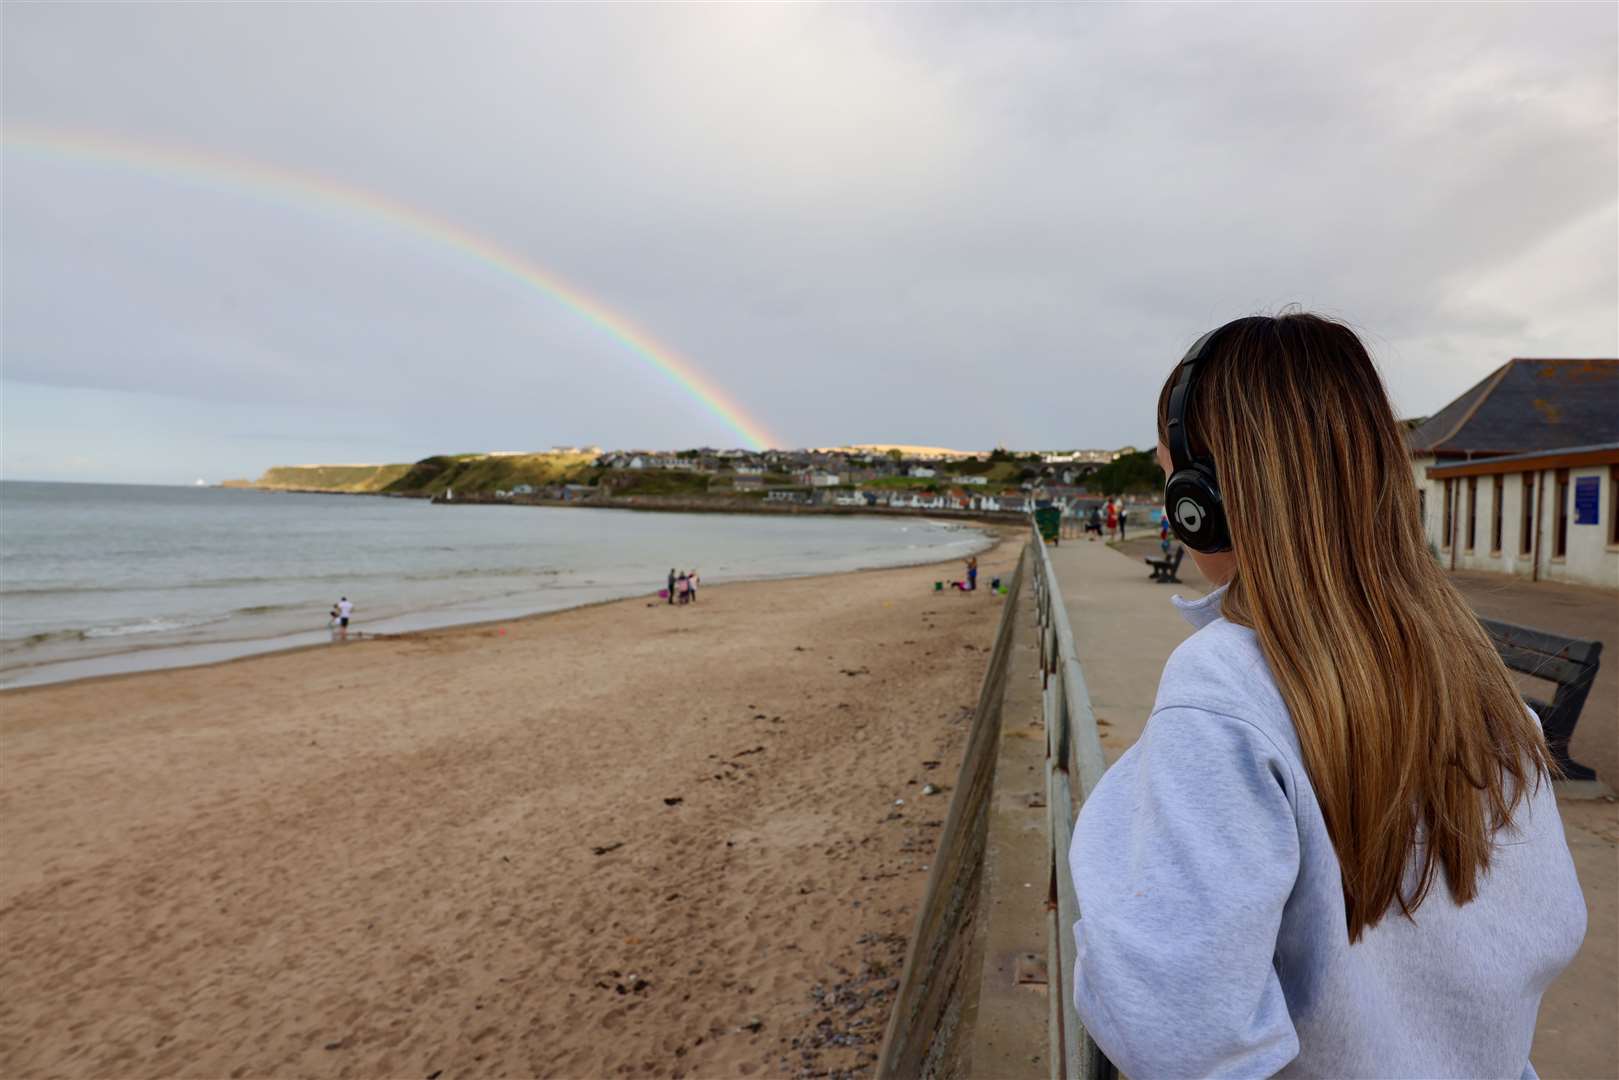 A fantastic rainbow in the sky above Cullen as this girl listens. Picture: Graeme Roger (Wildbird)